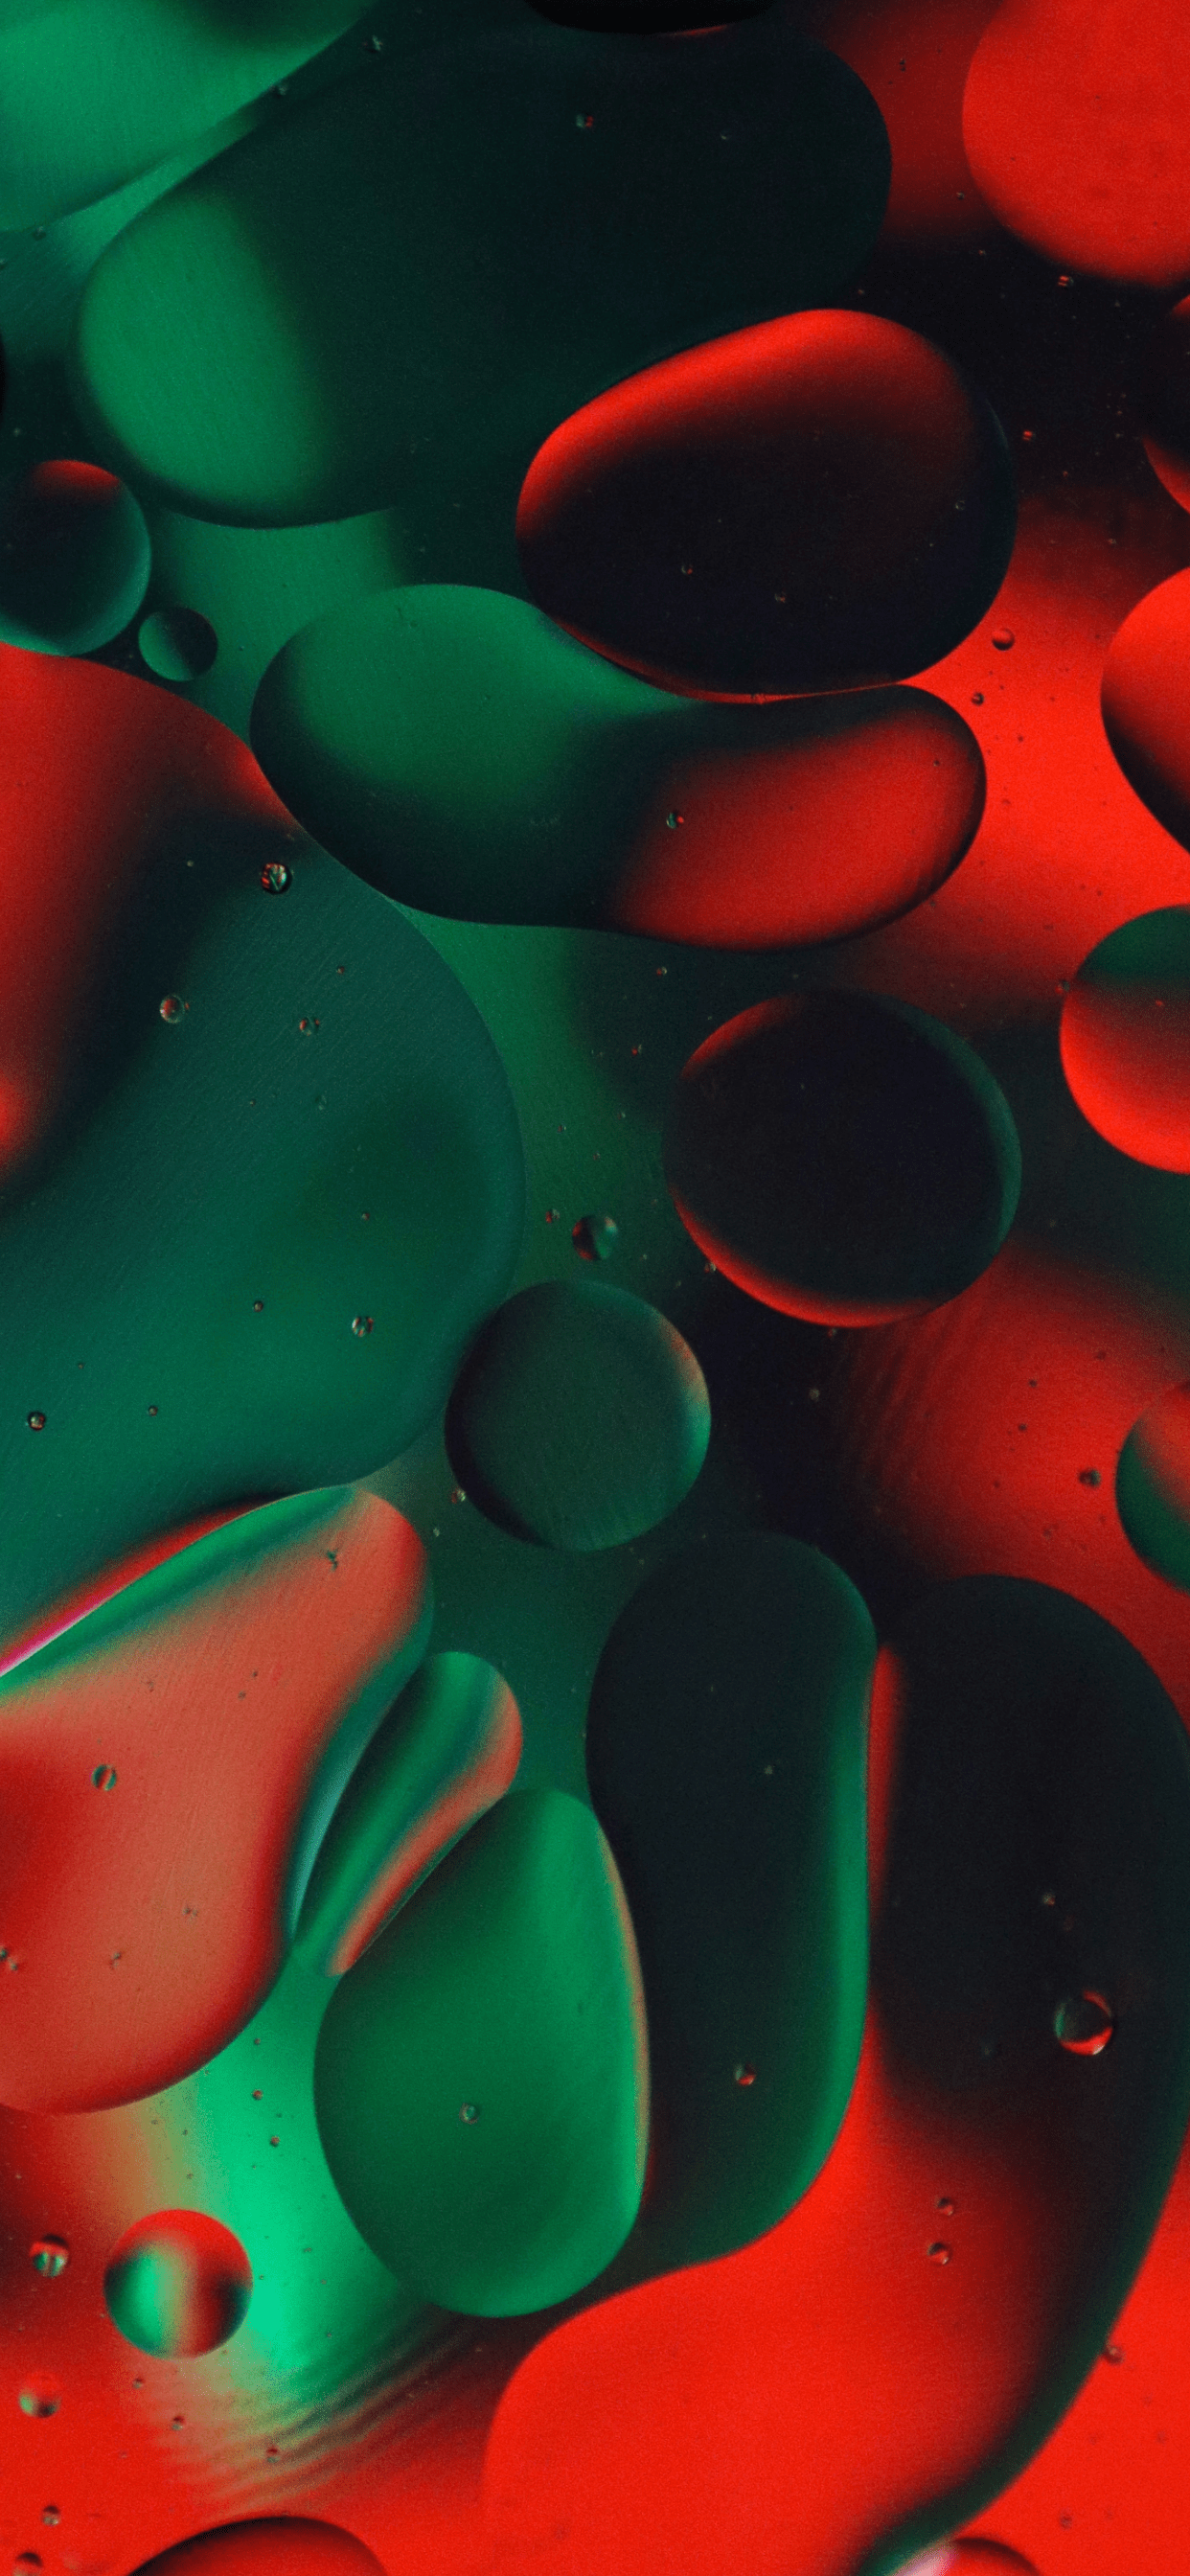 Abstract Wallpaper for iPhone Pro Max, X, 6